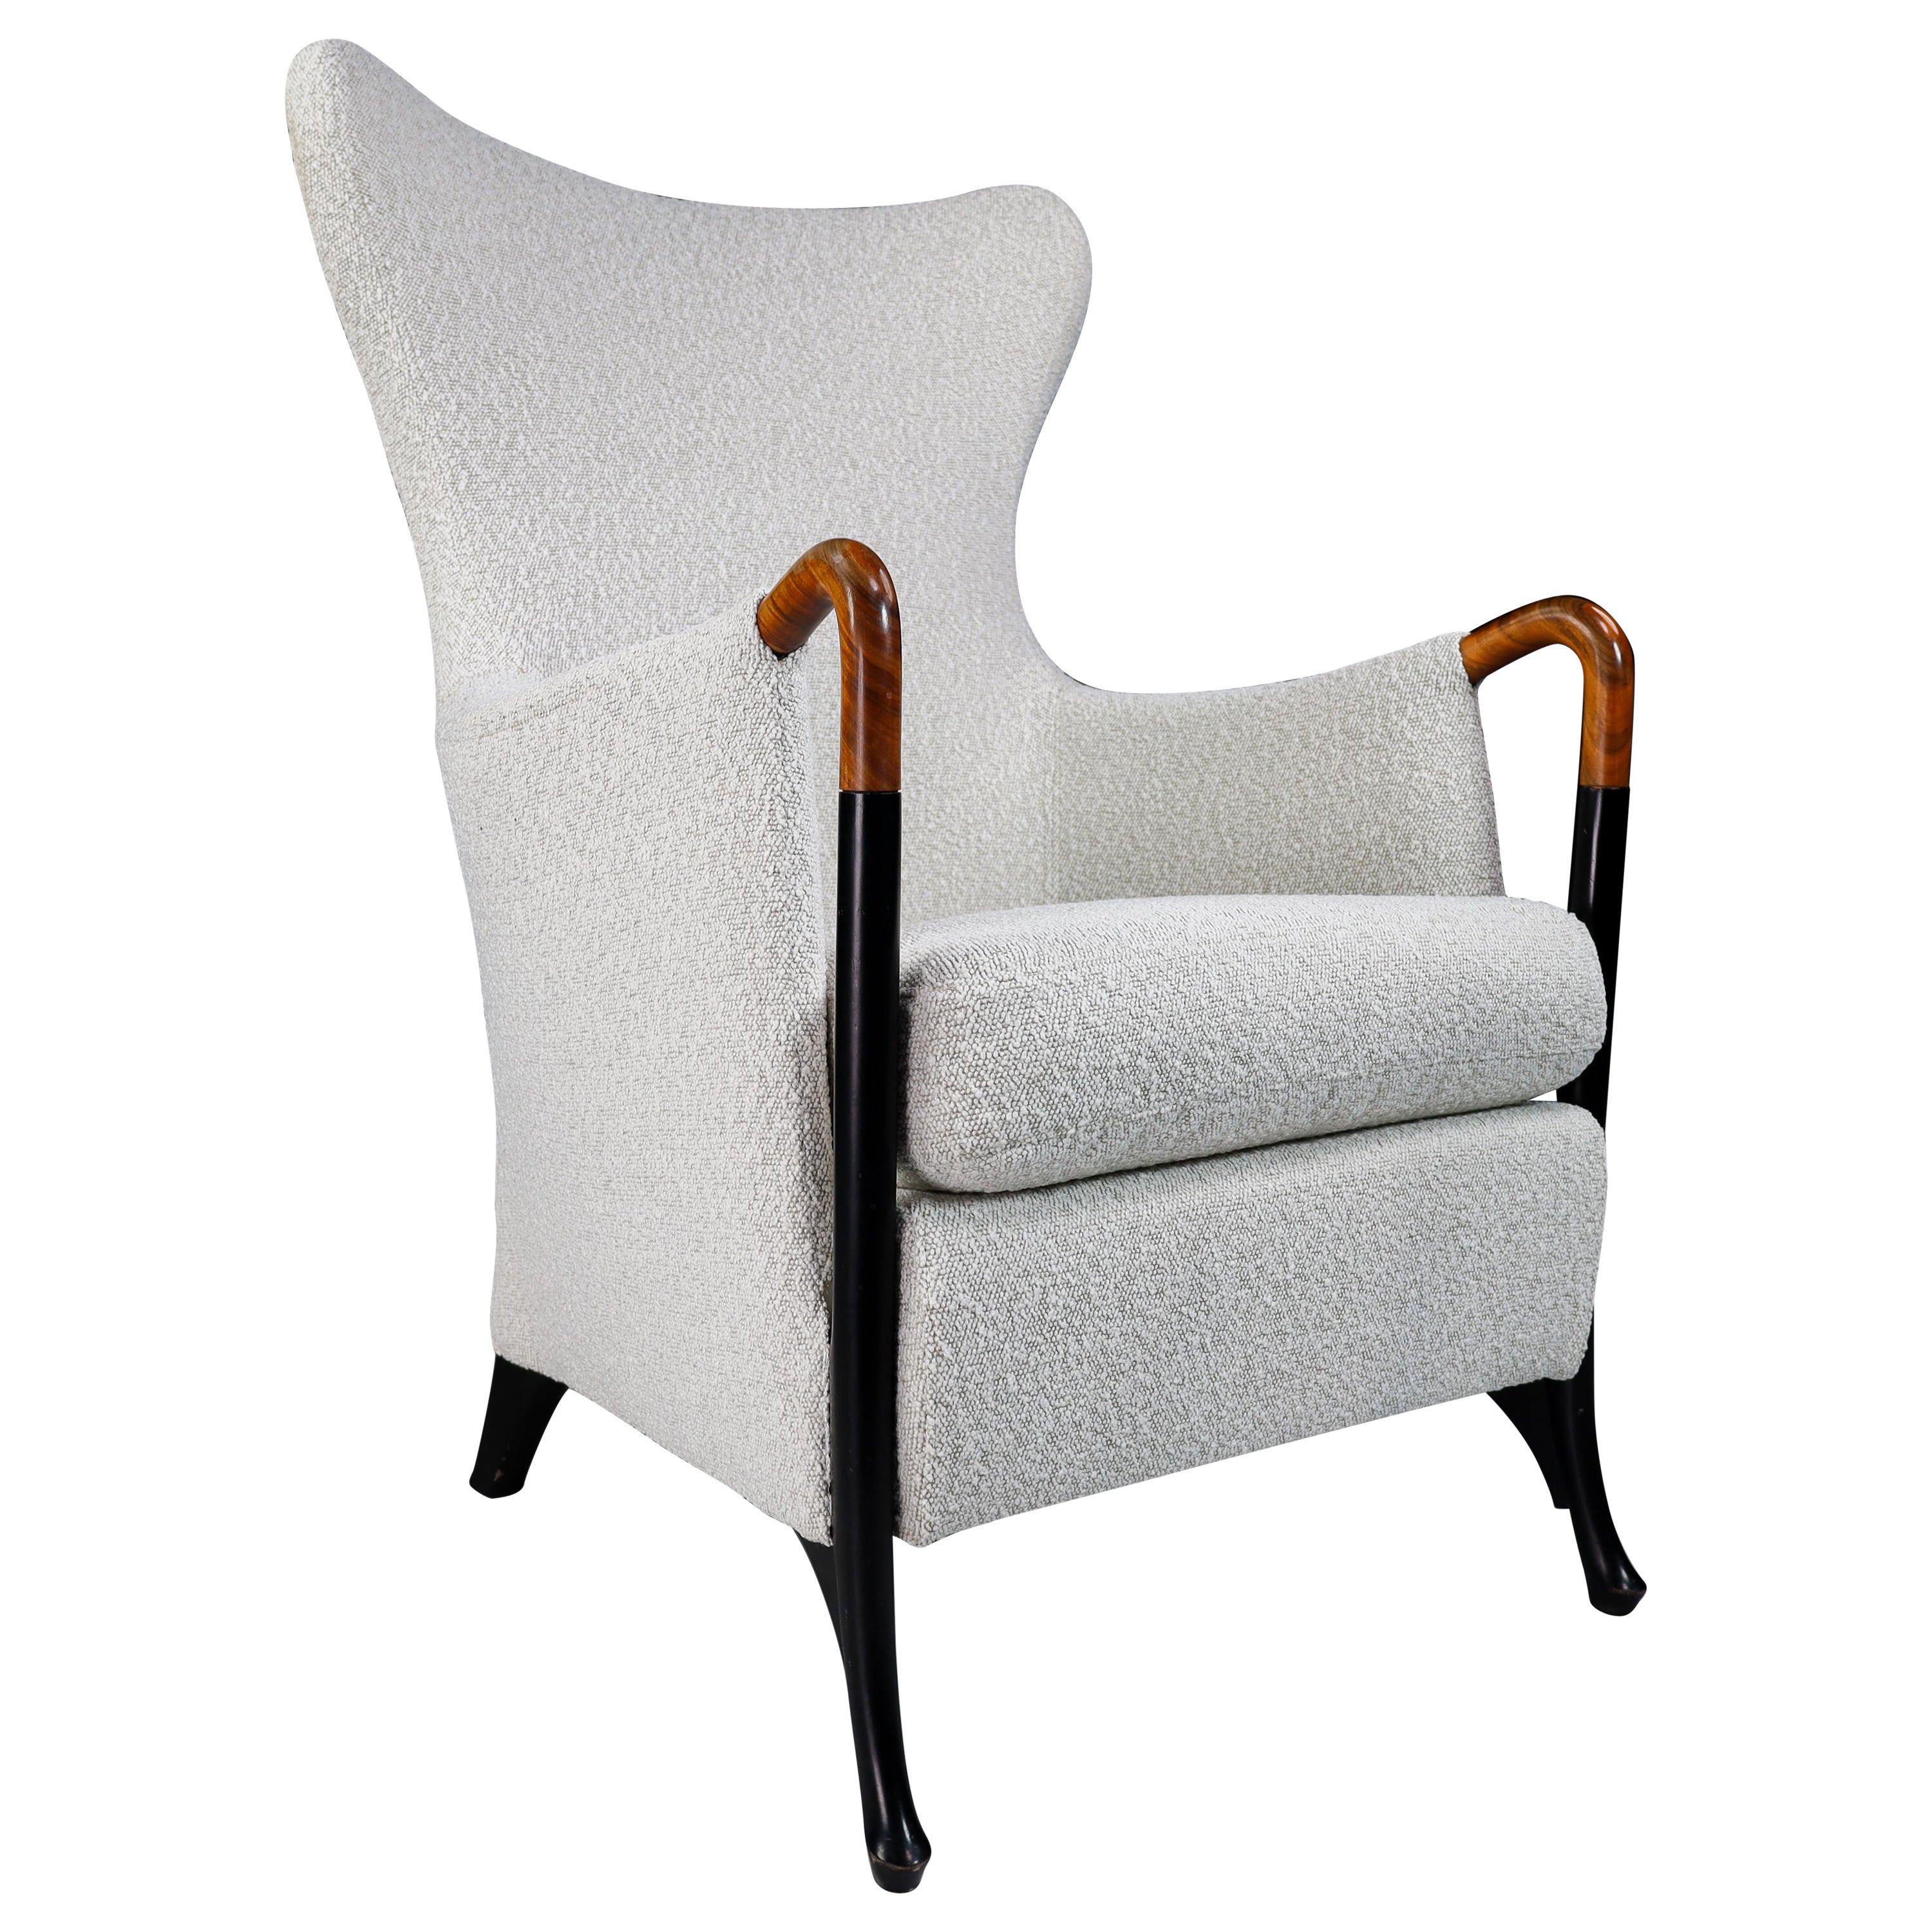 Progetti Wingback Chair by Umberto Asnago for Giorgetti in Bouclé Wool Fabric